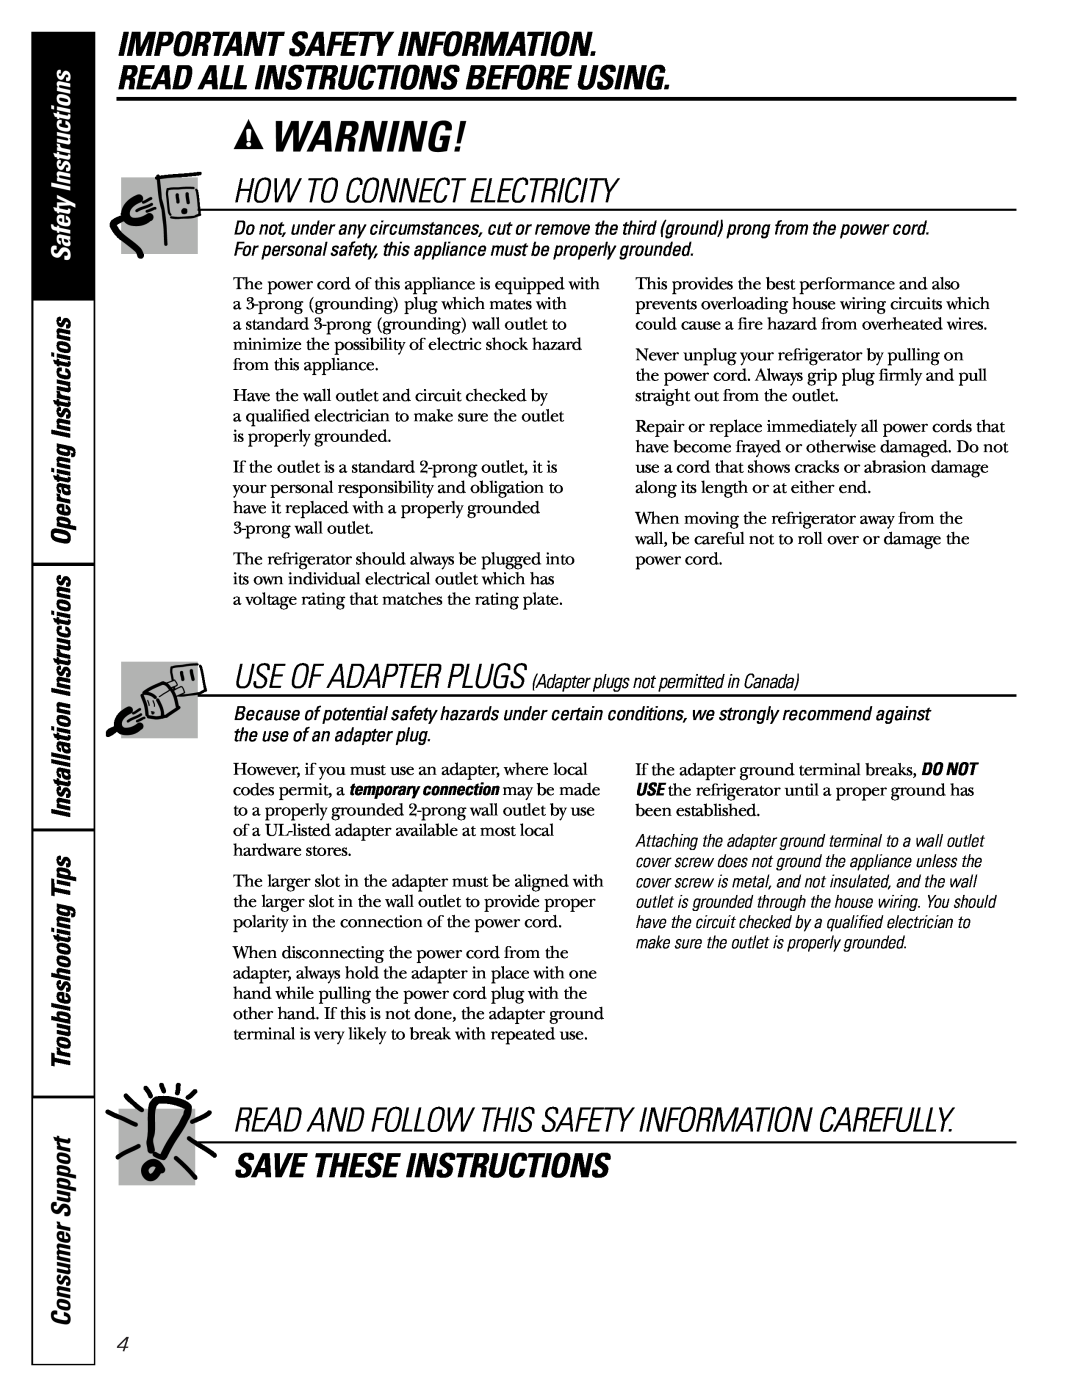 GE 200D2600P015 How To Connect Electricity, Save These Instructions, Troubleshooting Tips, Consumer Support 